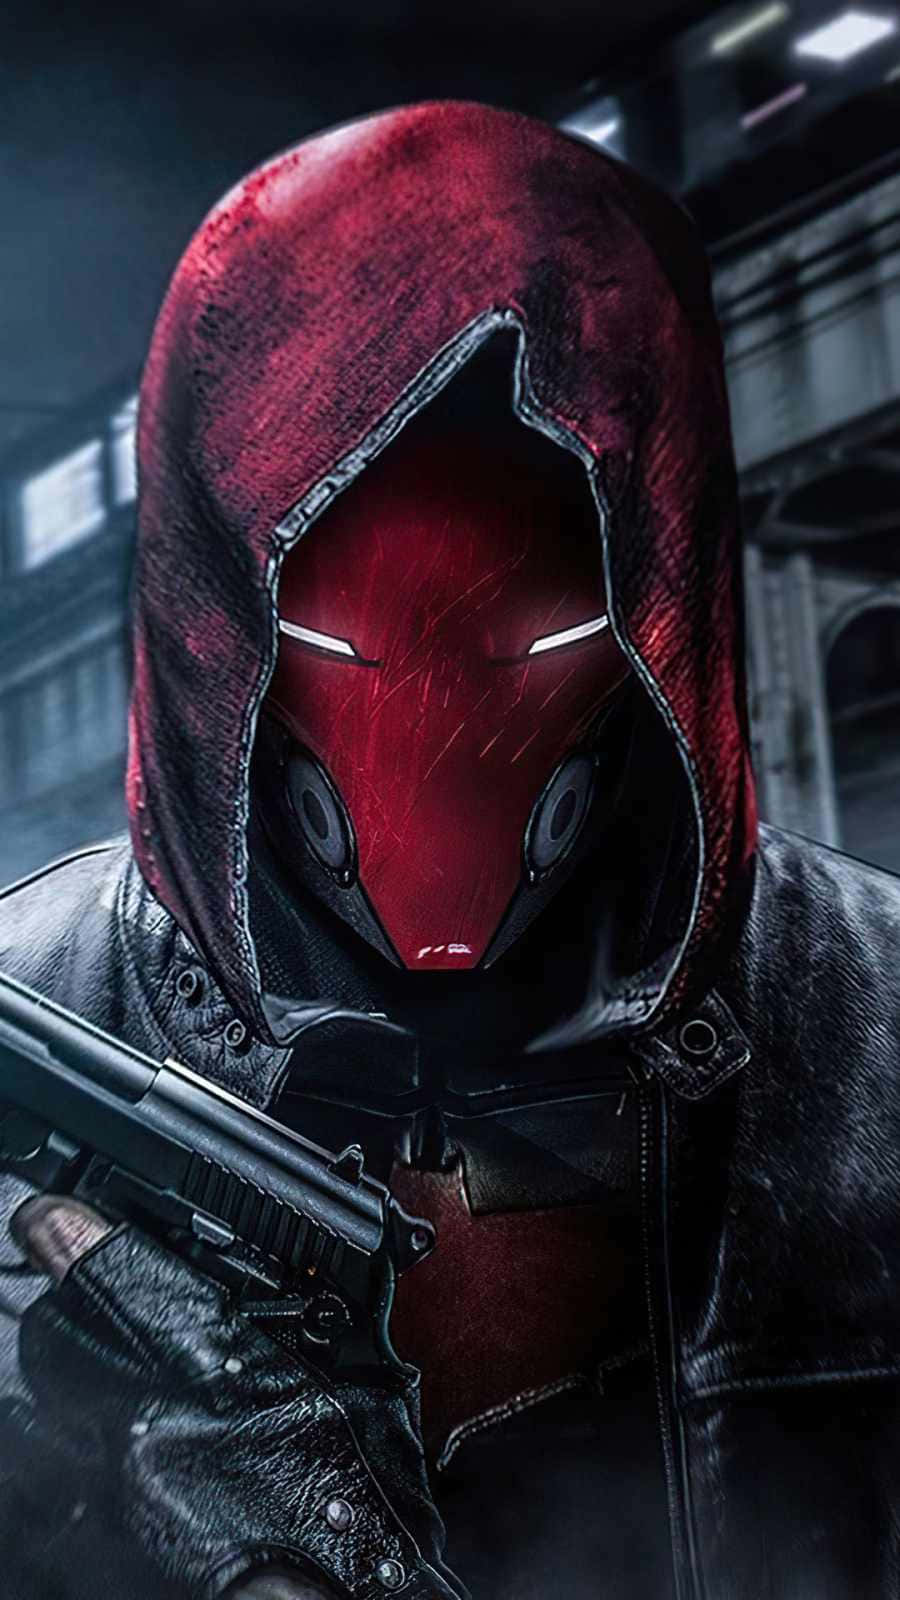 Protecting and saving her community. Red Hood fights for justice.